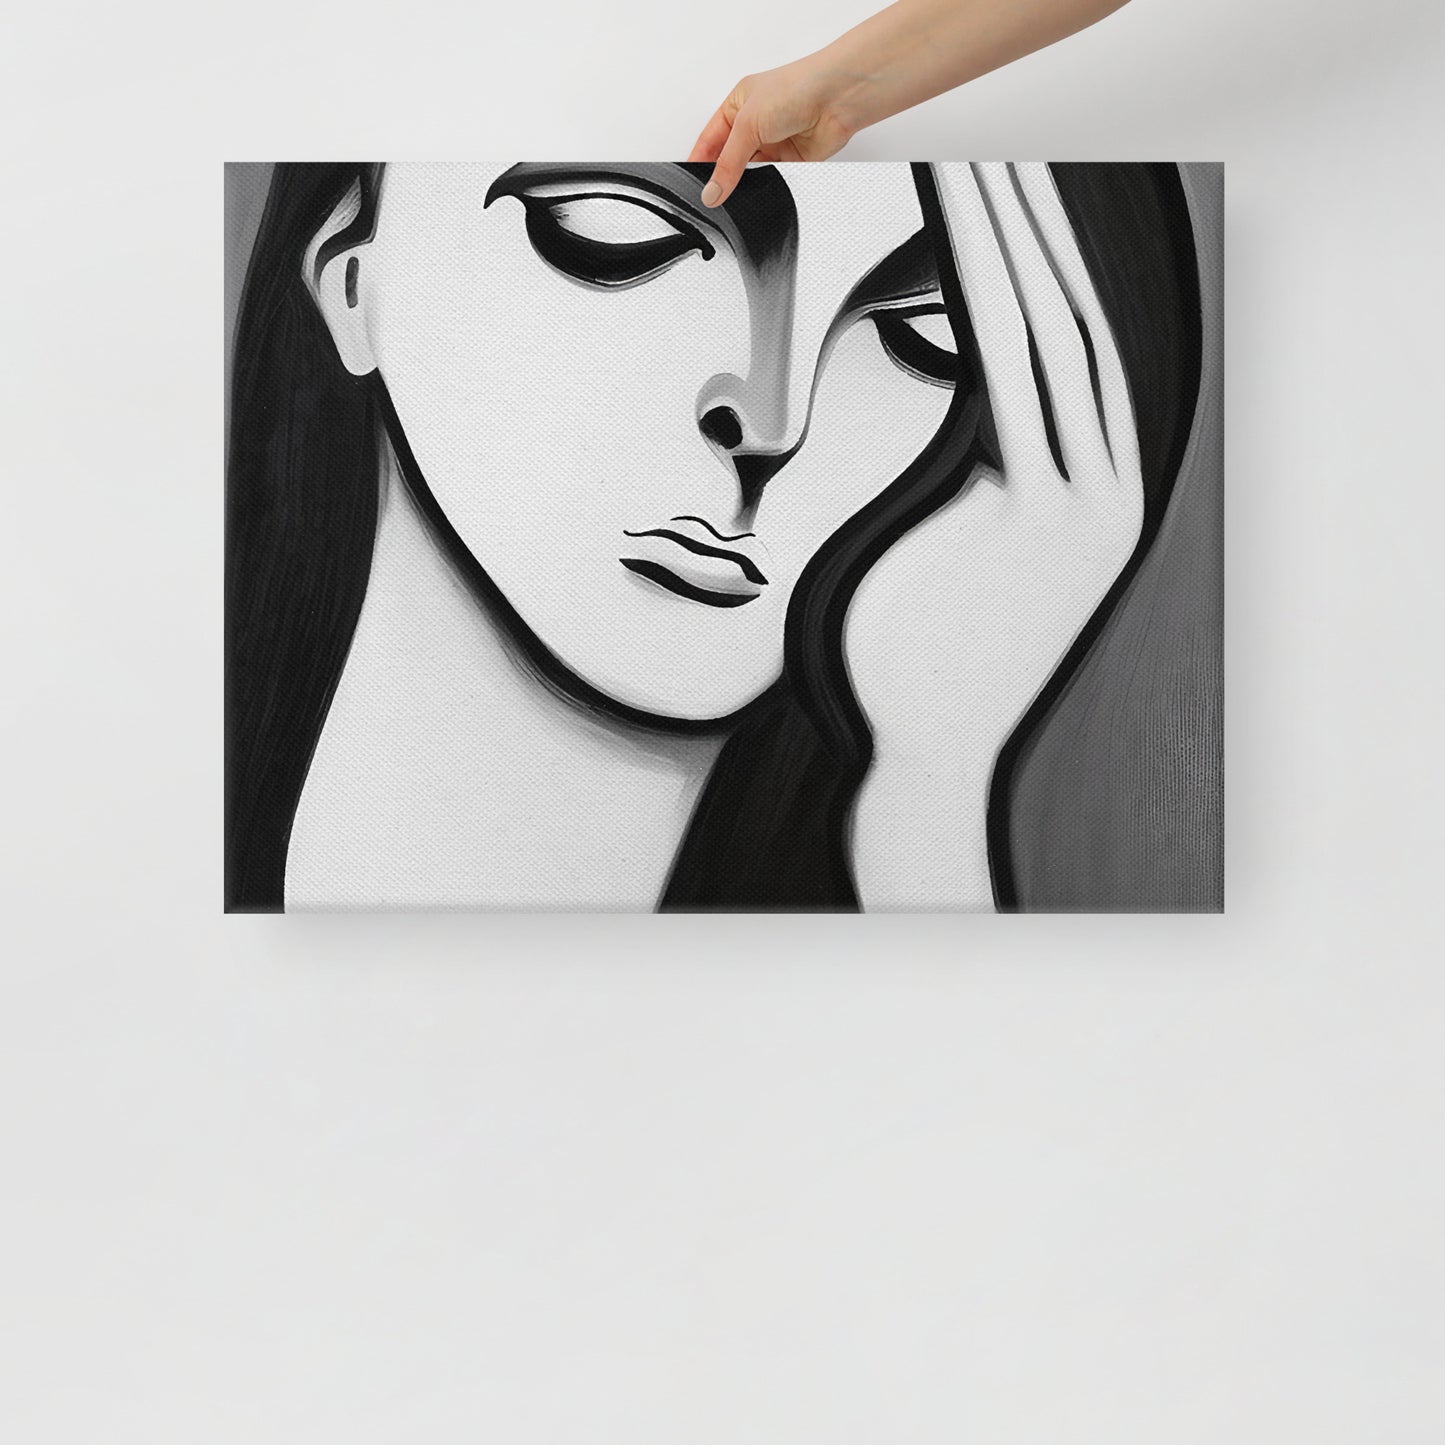 Lost in Sorrow - Hauntingly Beautiful Black and White Canvas Print of a Woman's Touching Poignancy Wallart